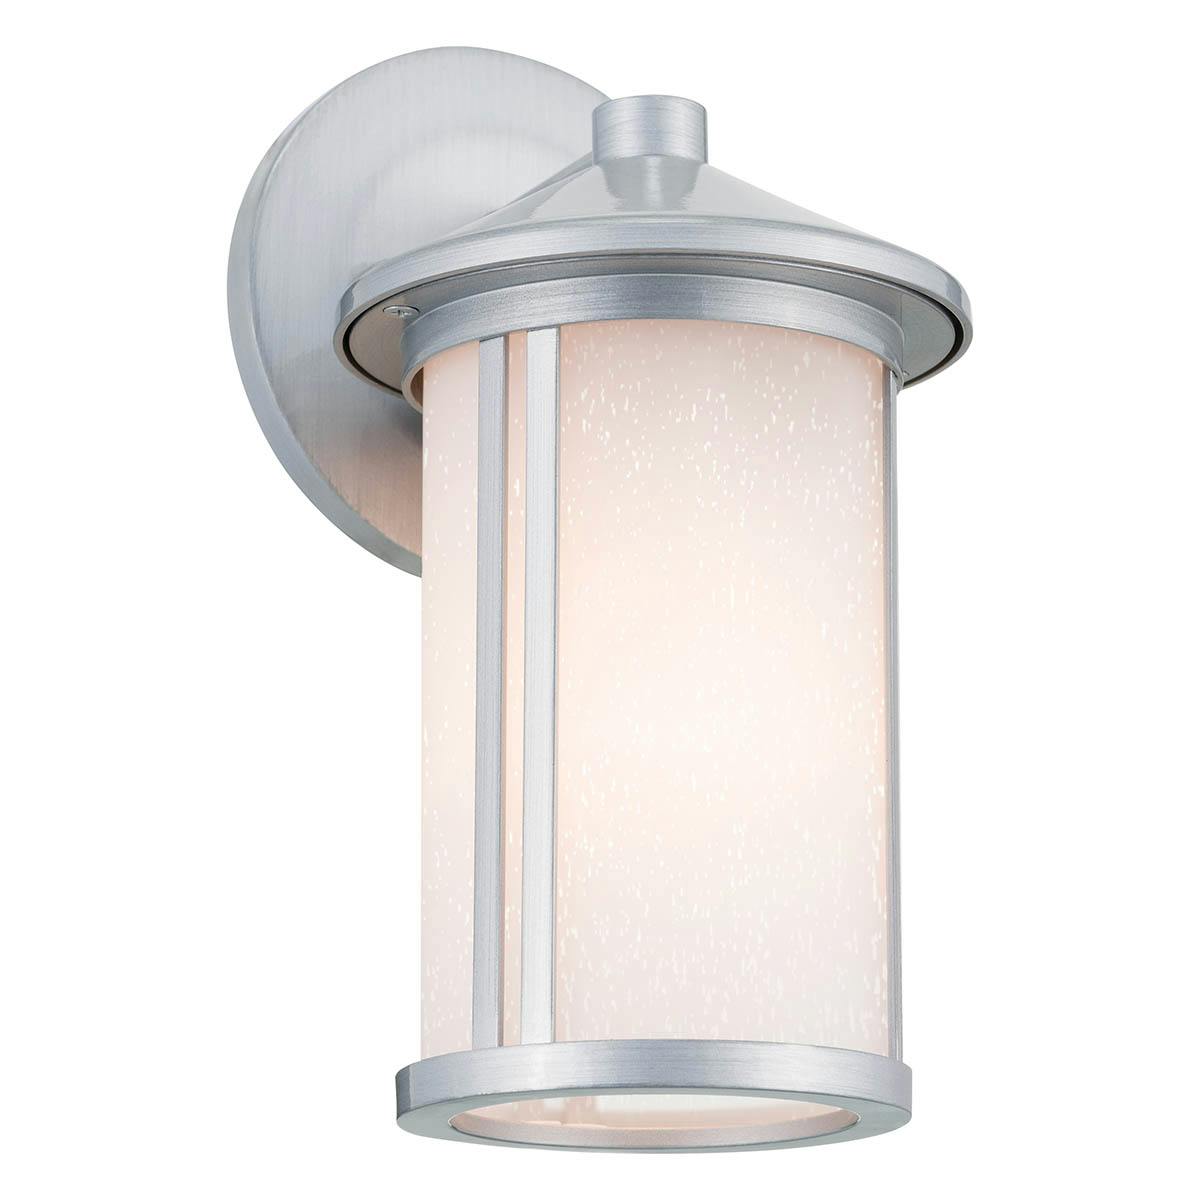 Lombard 10.5" 1 Light Wall Light Aluminum on a white background